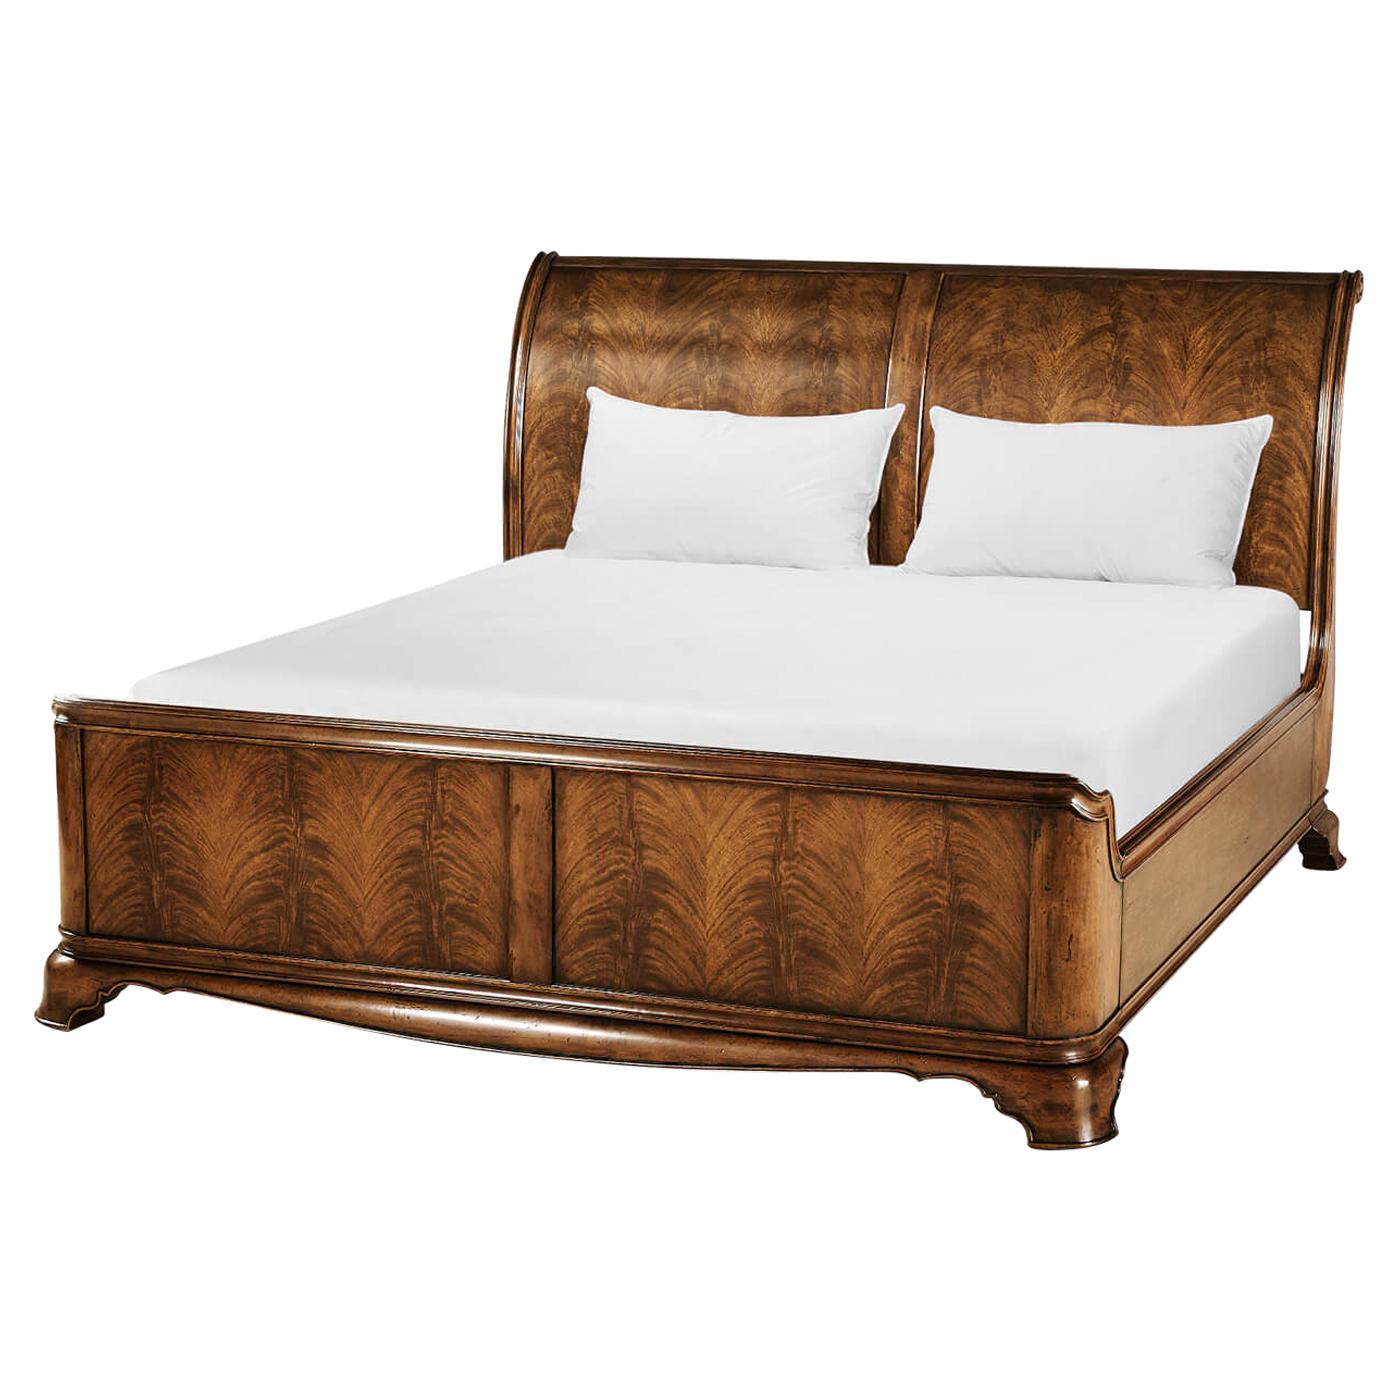 French Walnut Sleigh Bed King At 1stdibs, Wooden Sleigh King Bed Frame